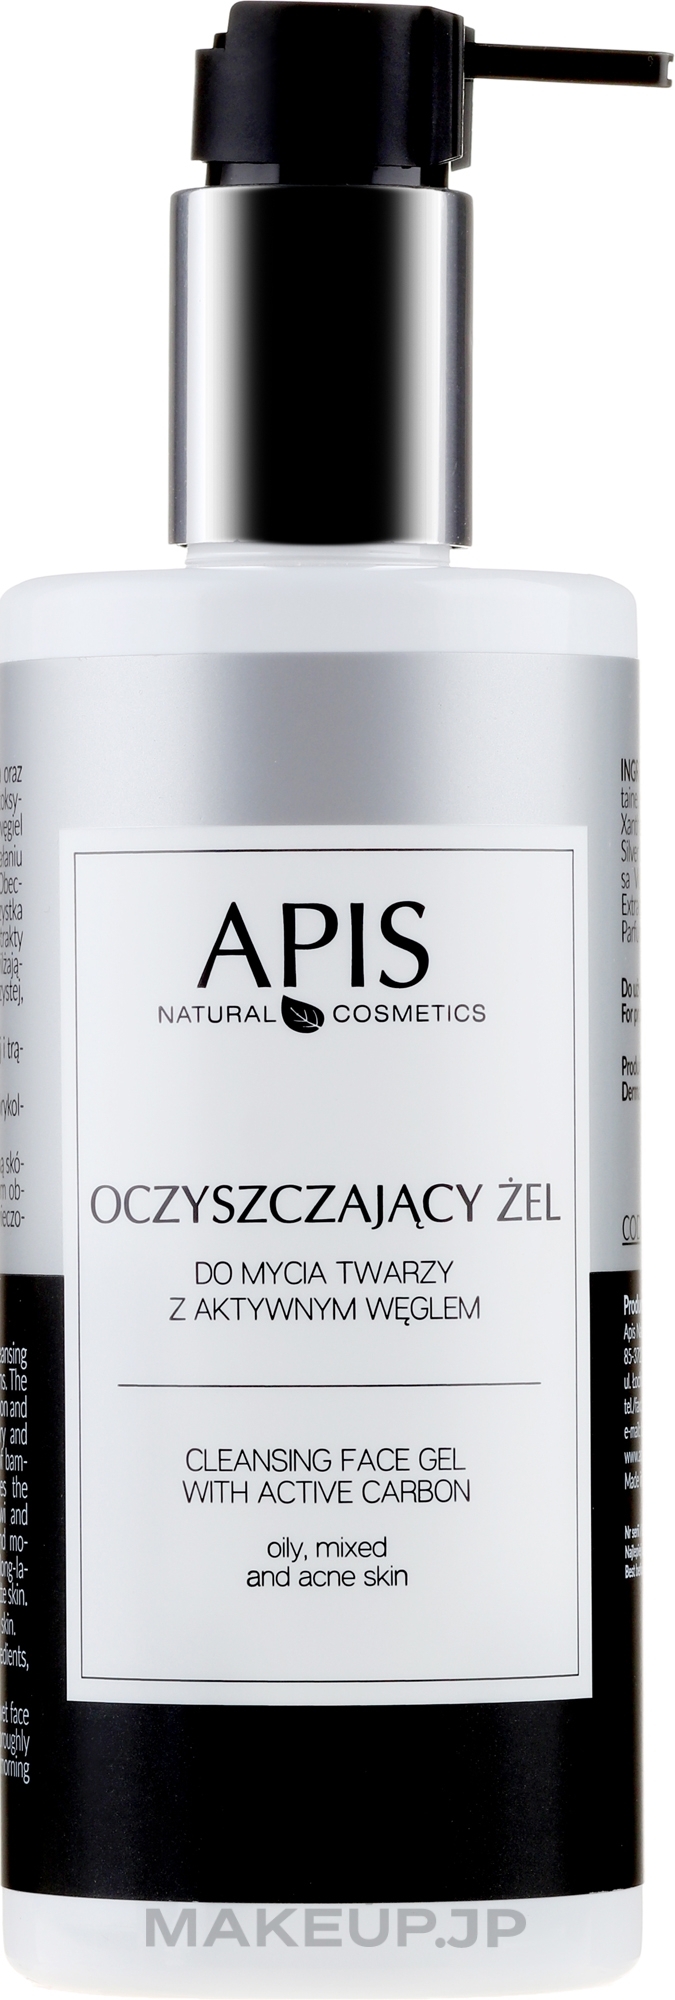 Face Cleansing Charcoal Gel - APIS Professional Cleansing Gel — photo 300 ml